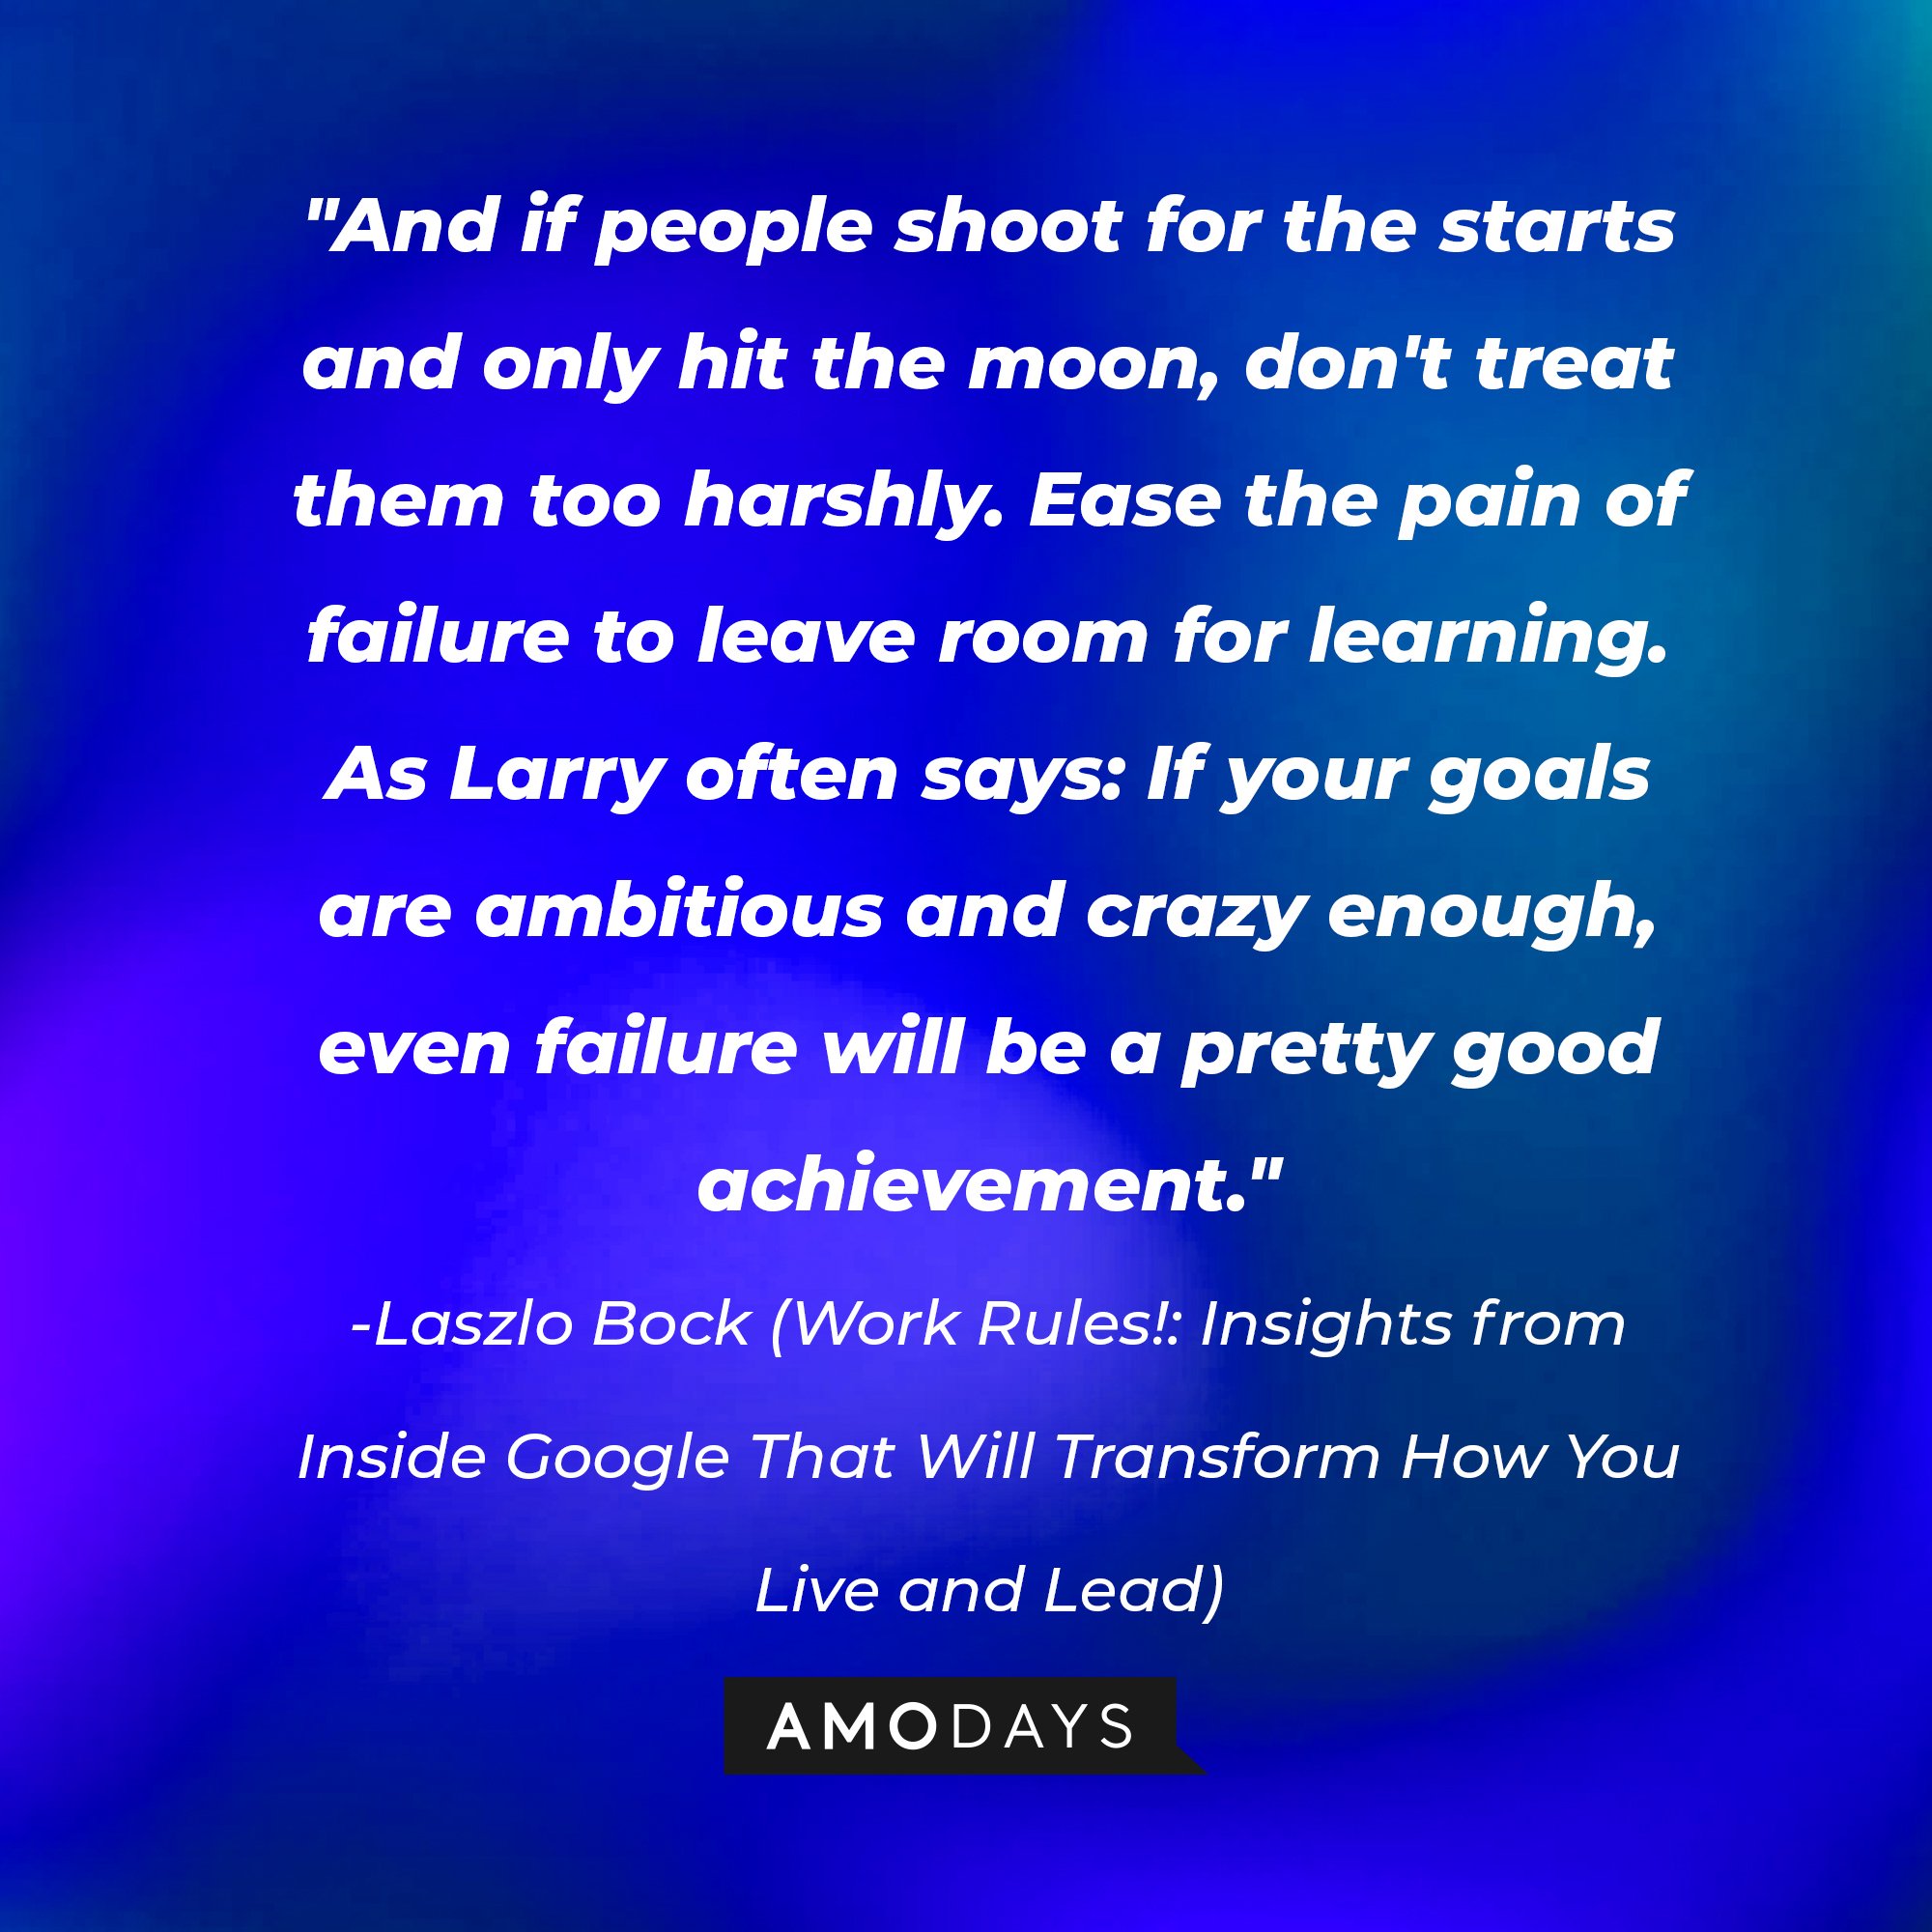 Laszlo Bock's quote: "And if people shoot for the starts and only hit the moon, don't treat them too harshly. Ease the pain of failure to leave room for learning. As Larry often says: If your goals are ambitious and crazy enough, even failure will be a pretty good achievement." | Image: AmoDays